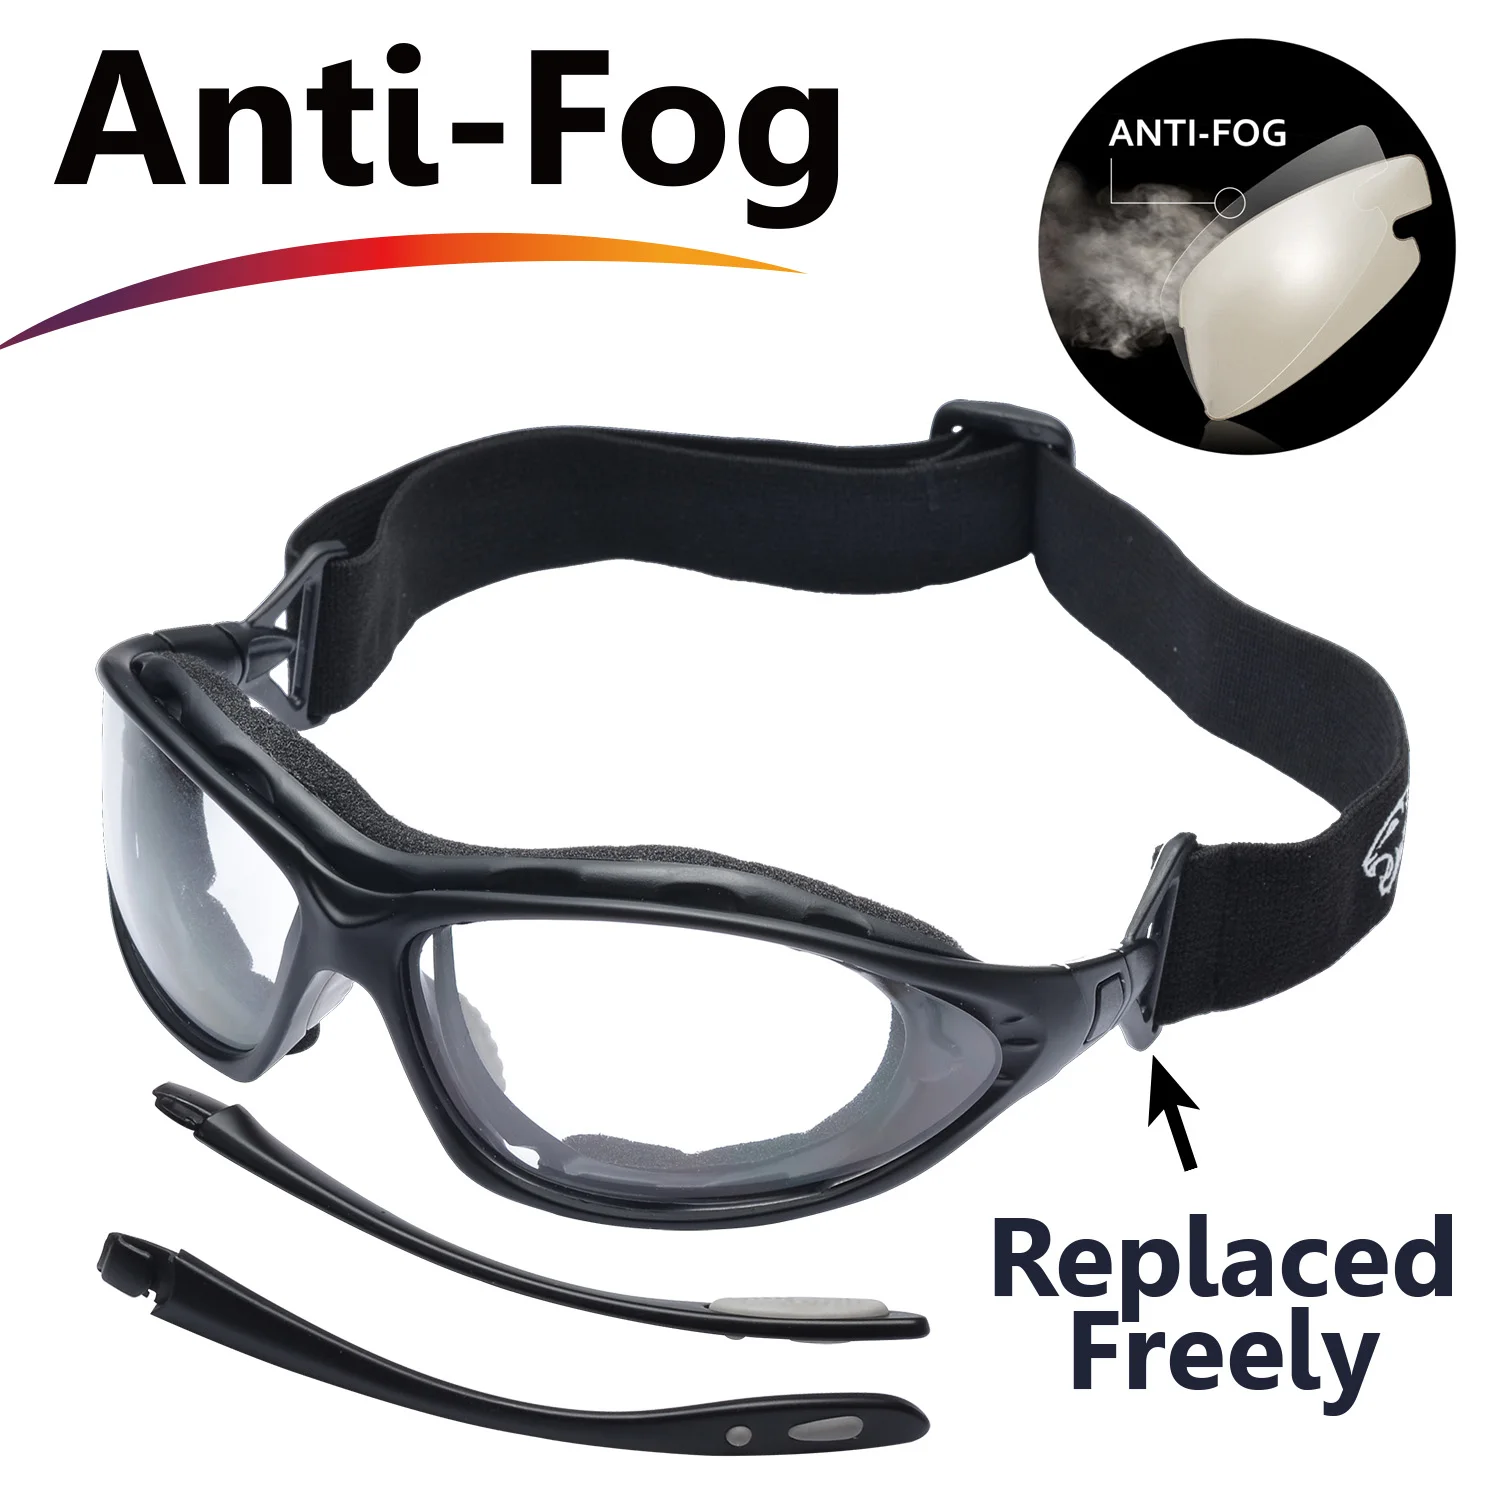 SAFEYEAR Safety Glasses Lab Work Protective Anti-scratch Eye Protection Goggles 